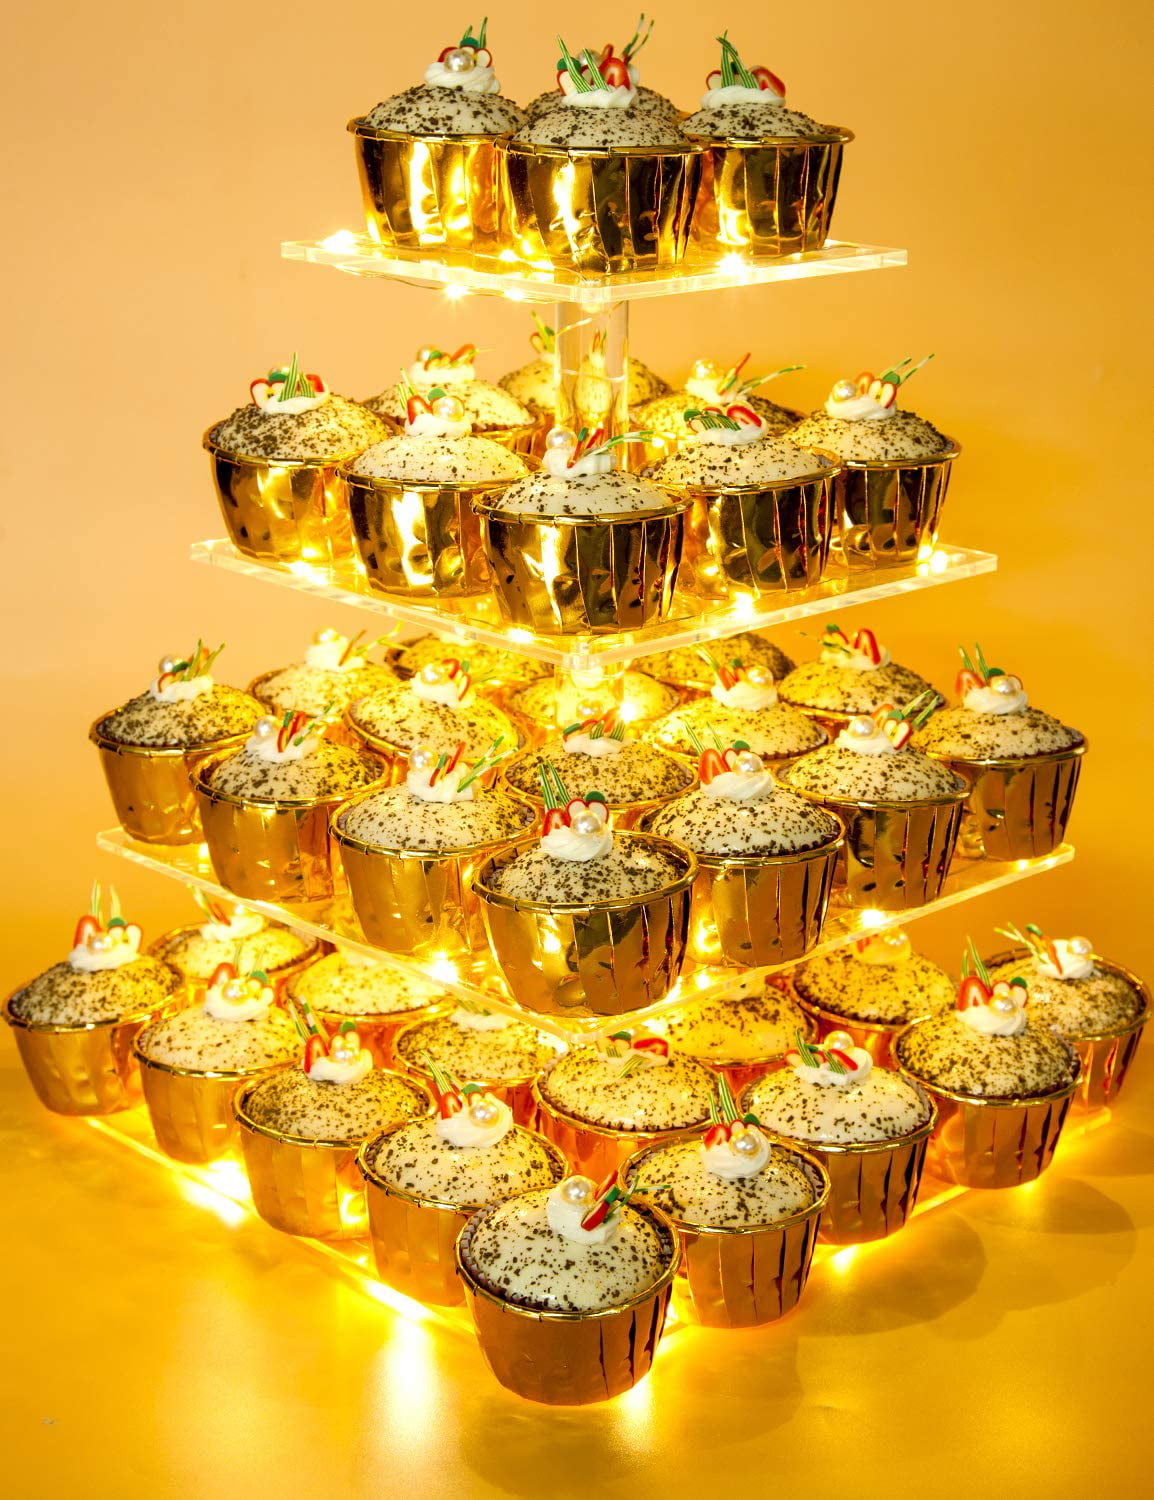 3 Tier Square Cupcake Tower Stacked Pastry Serving Platter Dessert Bar Table Display DIY Wedding Decoration